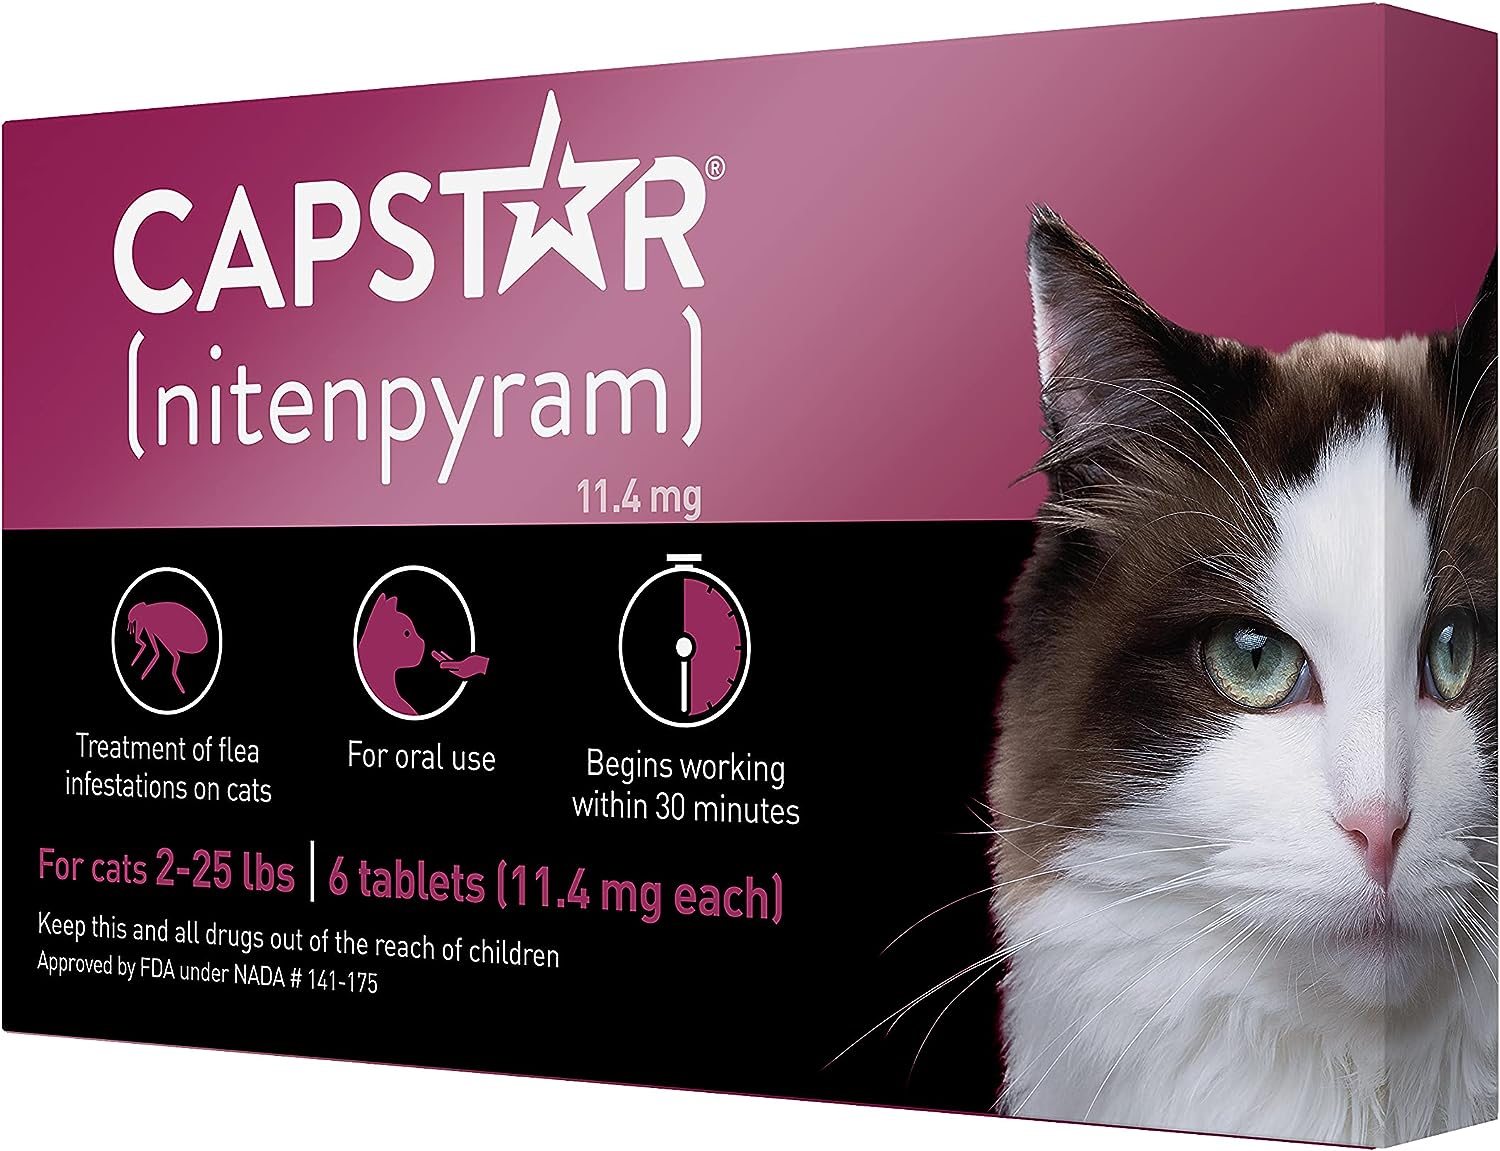 Capstar (nitenpyram) for Cats, Fast-Acting Oral Flea Treatment for Cats 2-25 lbs